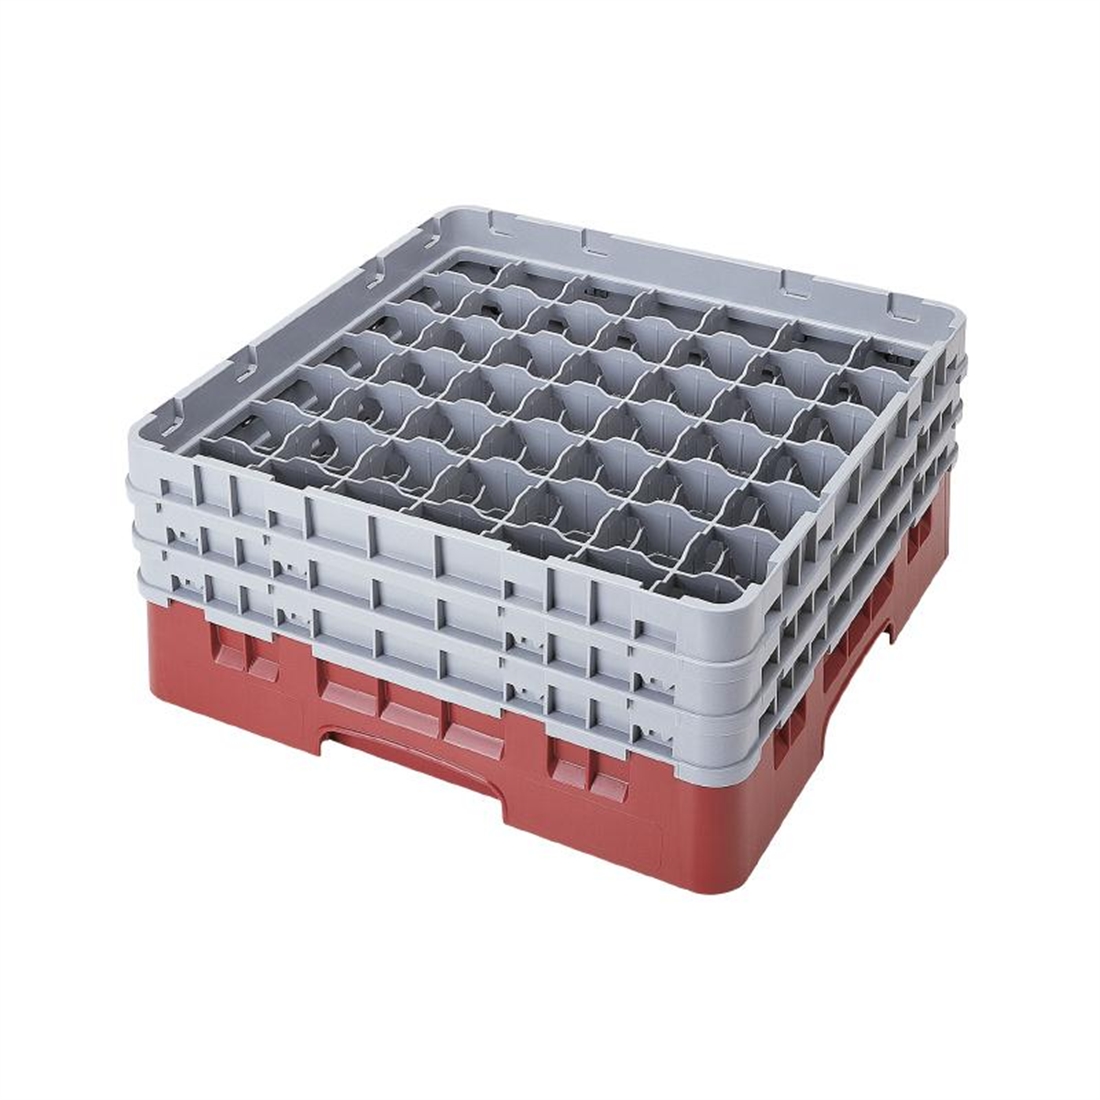 Cambro Camrack Beige 49 Compartments Max Glass Height 174mm